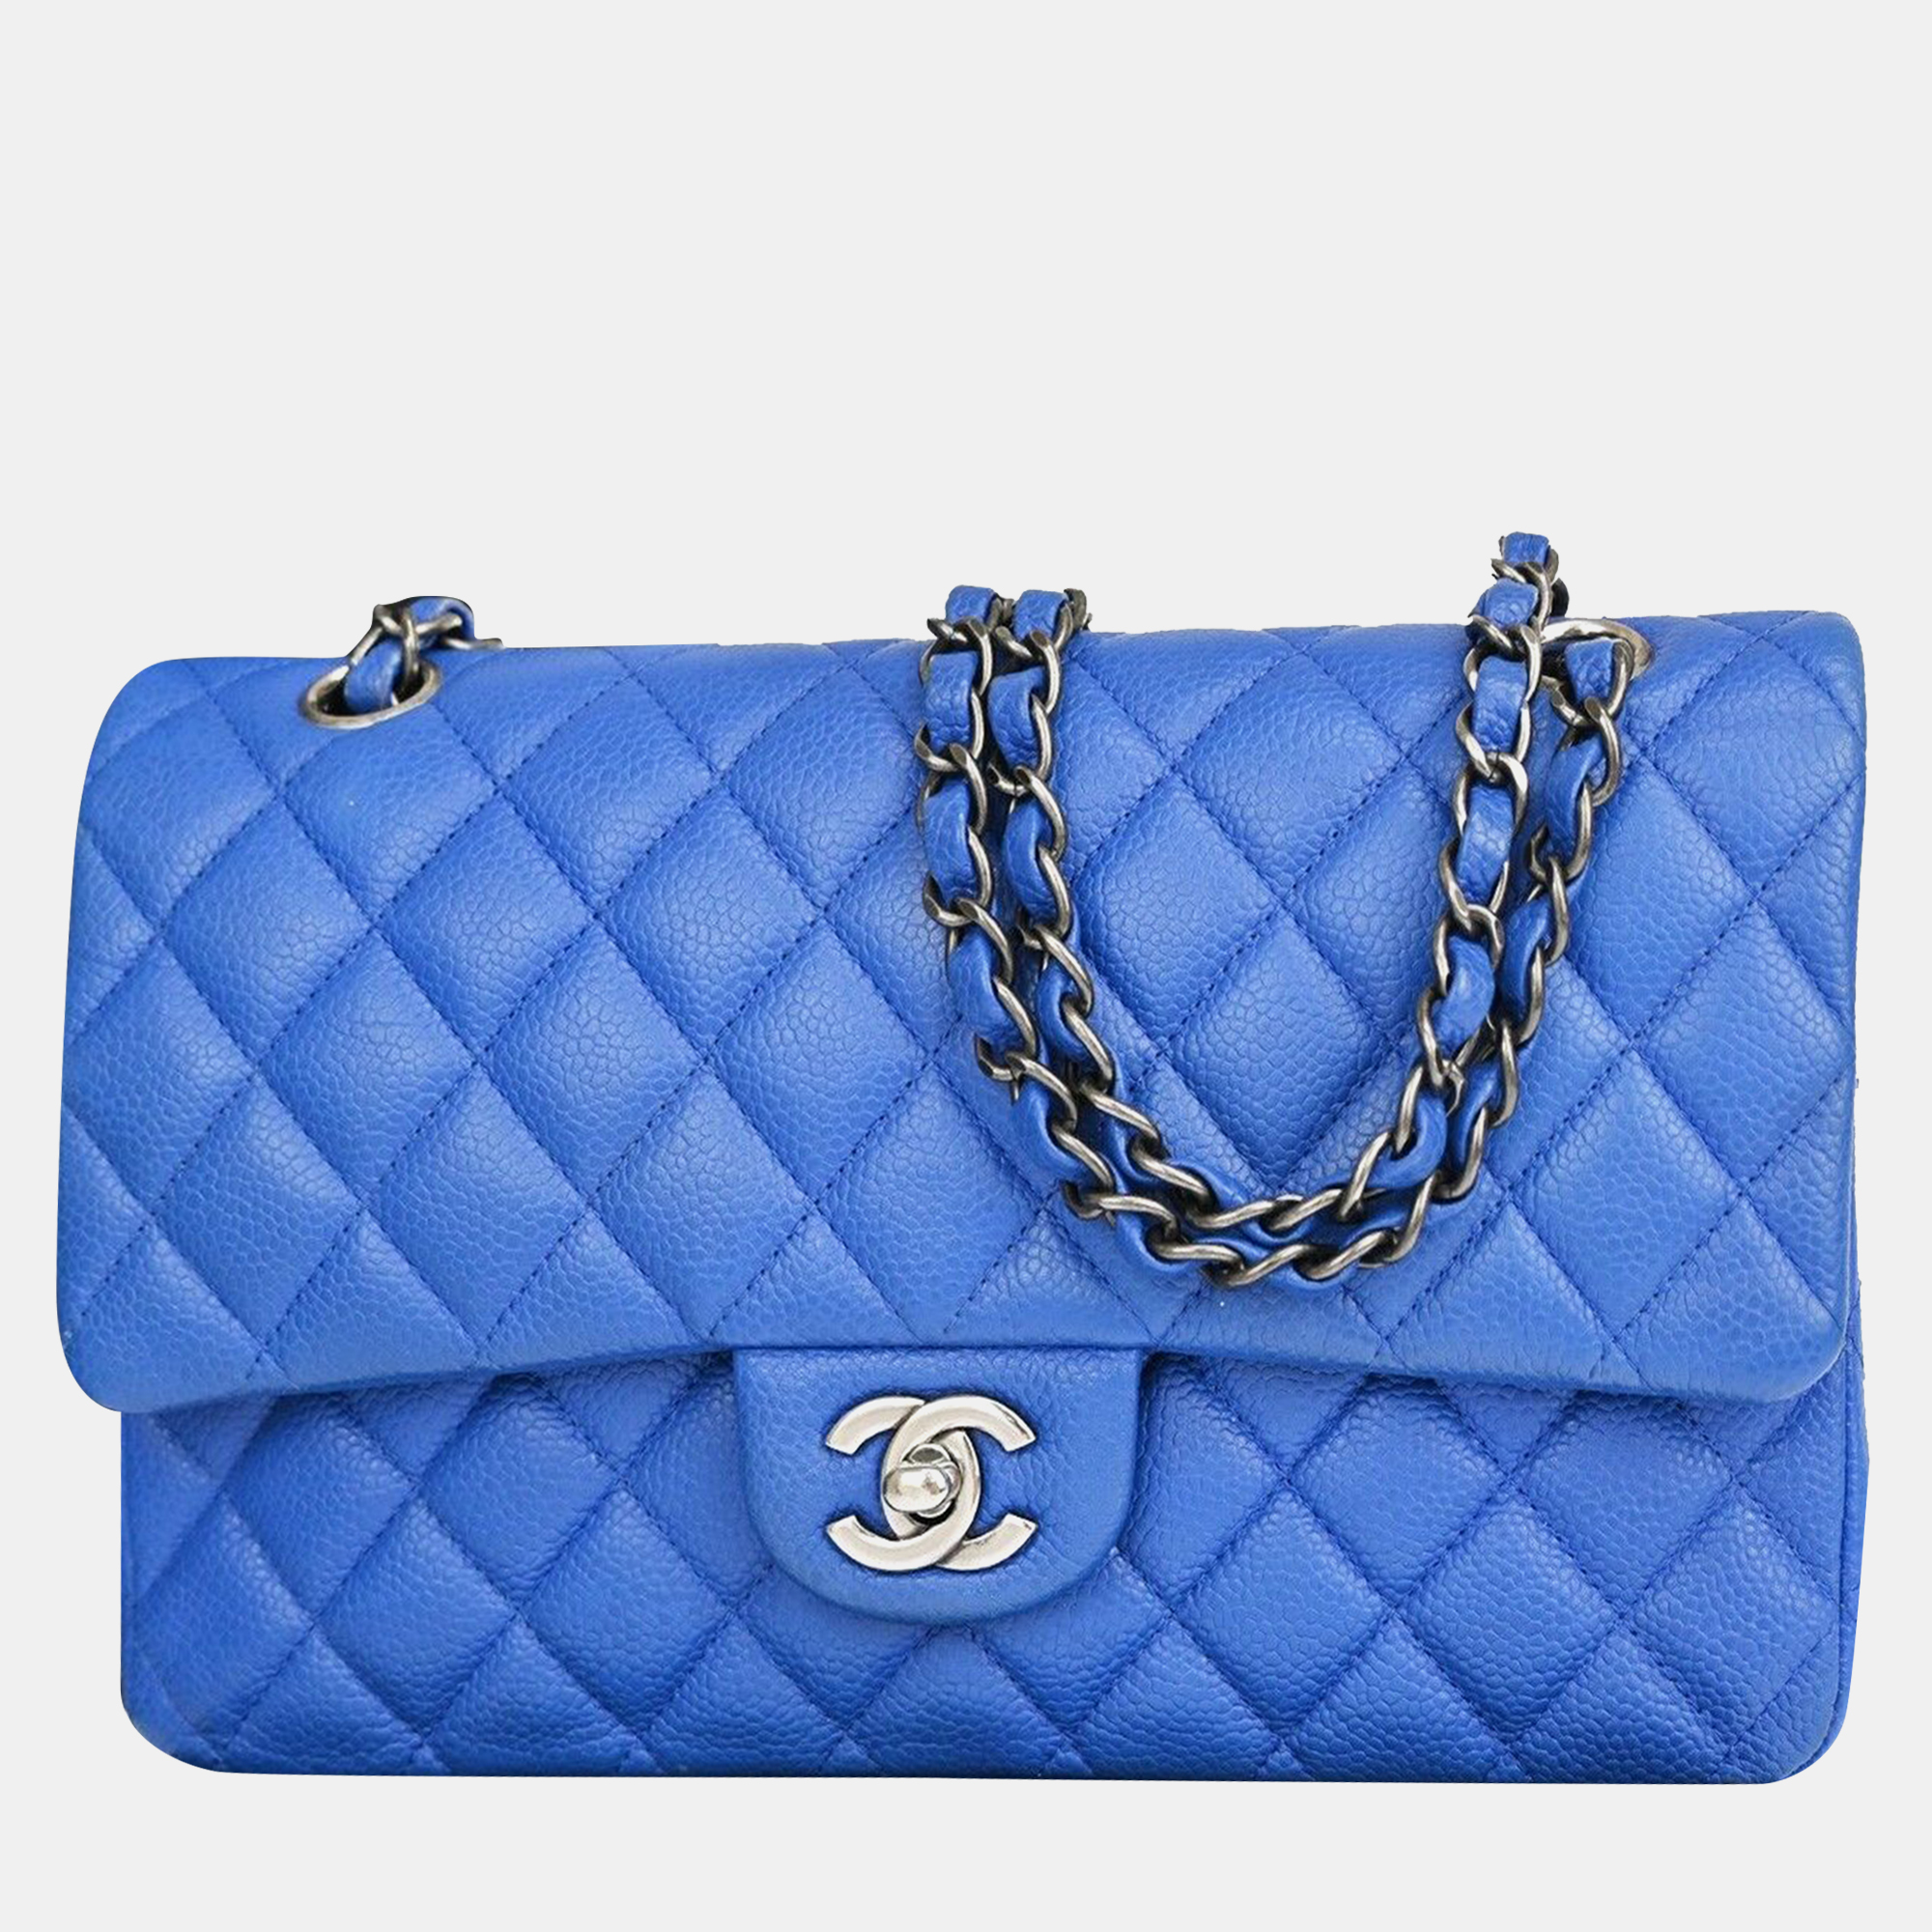 Chanel blue lambskin leather small classic double flap shoulder bags